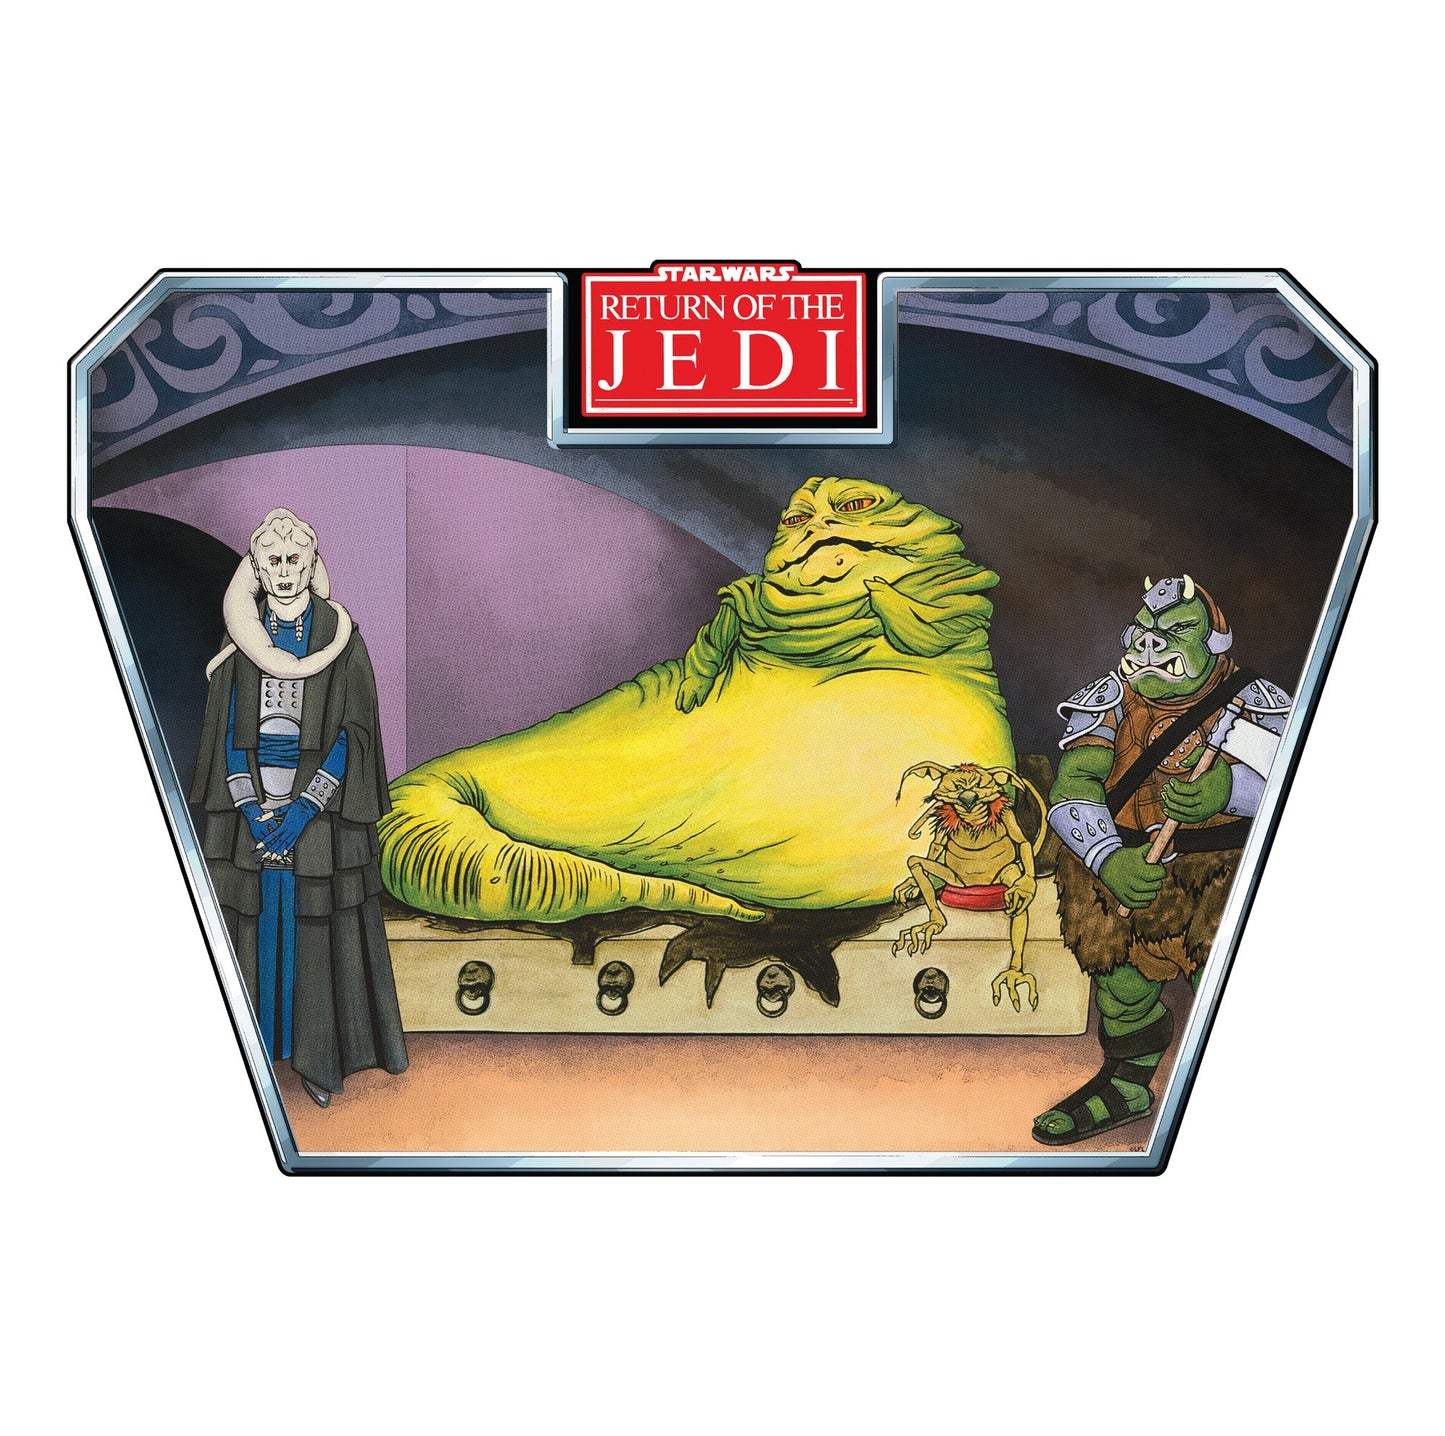 Return of the Jedi 40th: Jabba the Hutt Throne Room Instant Window - Officially Licensed Star Wars Removable Adhesive Decal